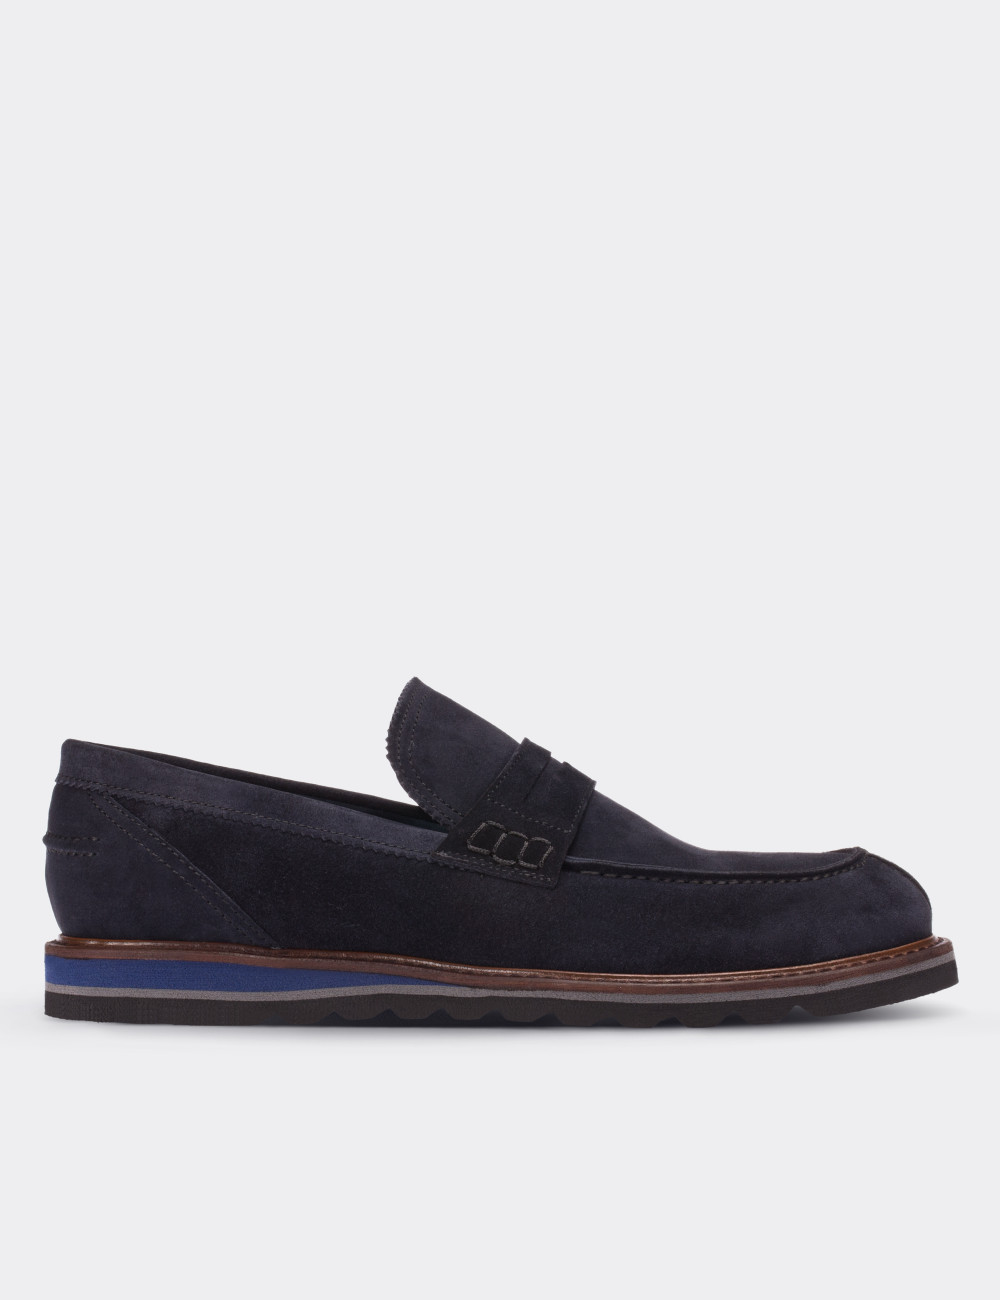 Navy Suede Leather Lace-up Shoes - 01148MLCVE04